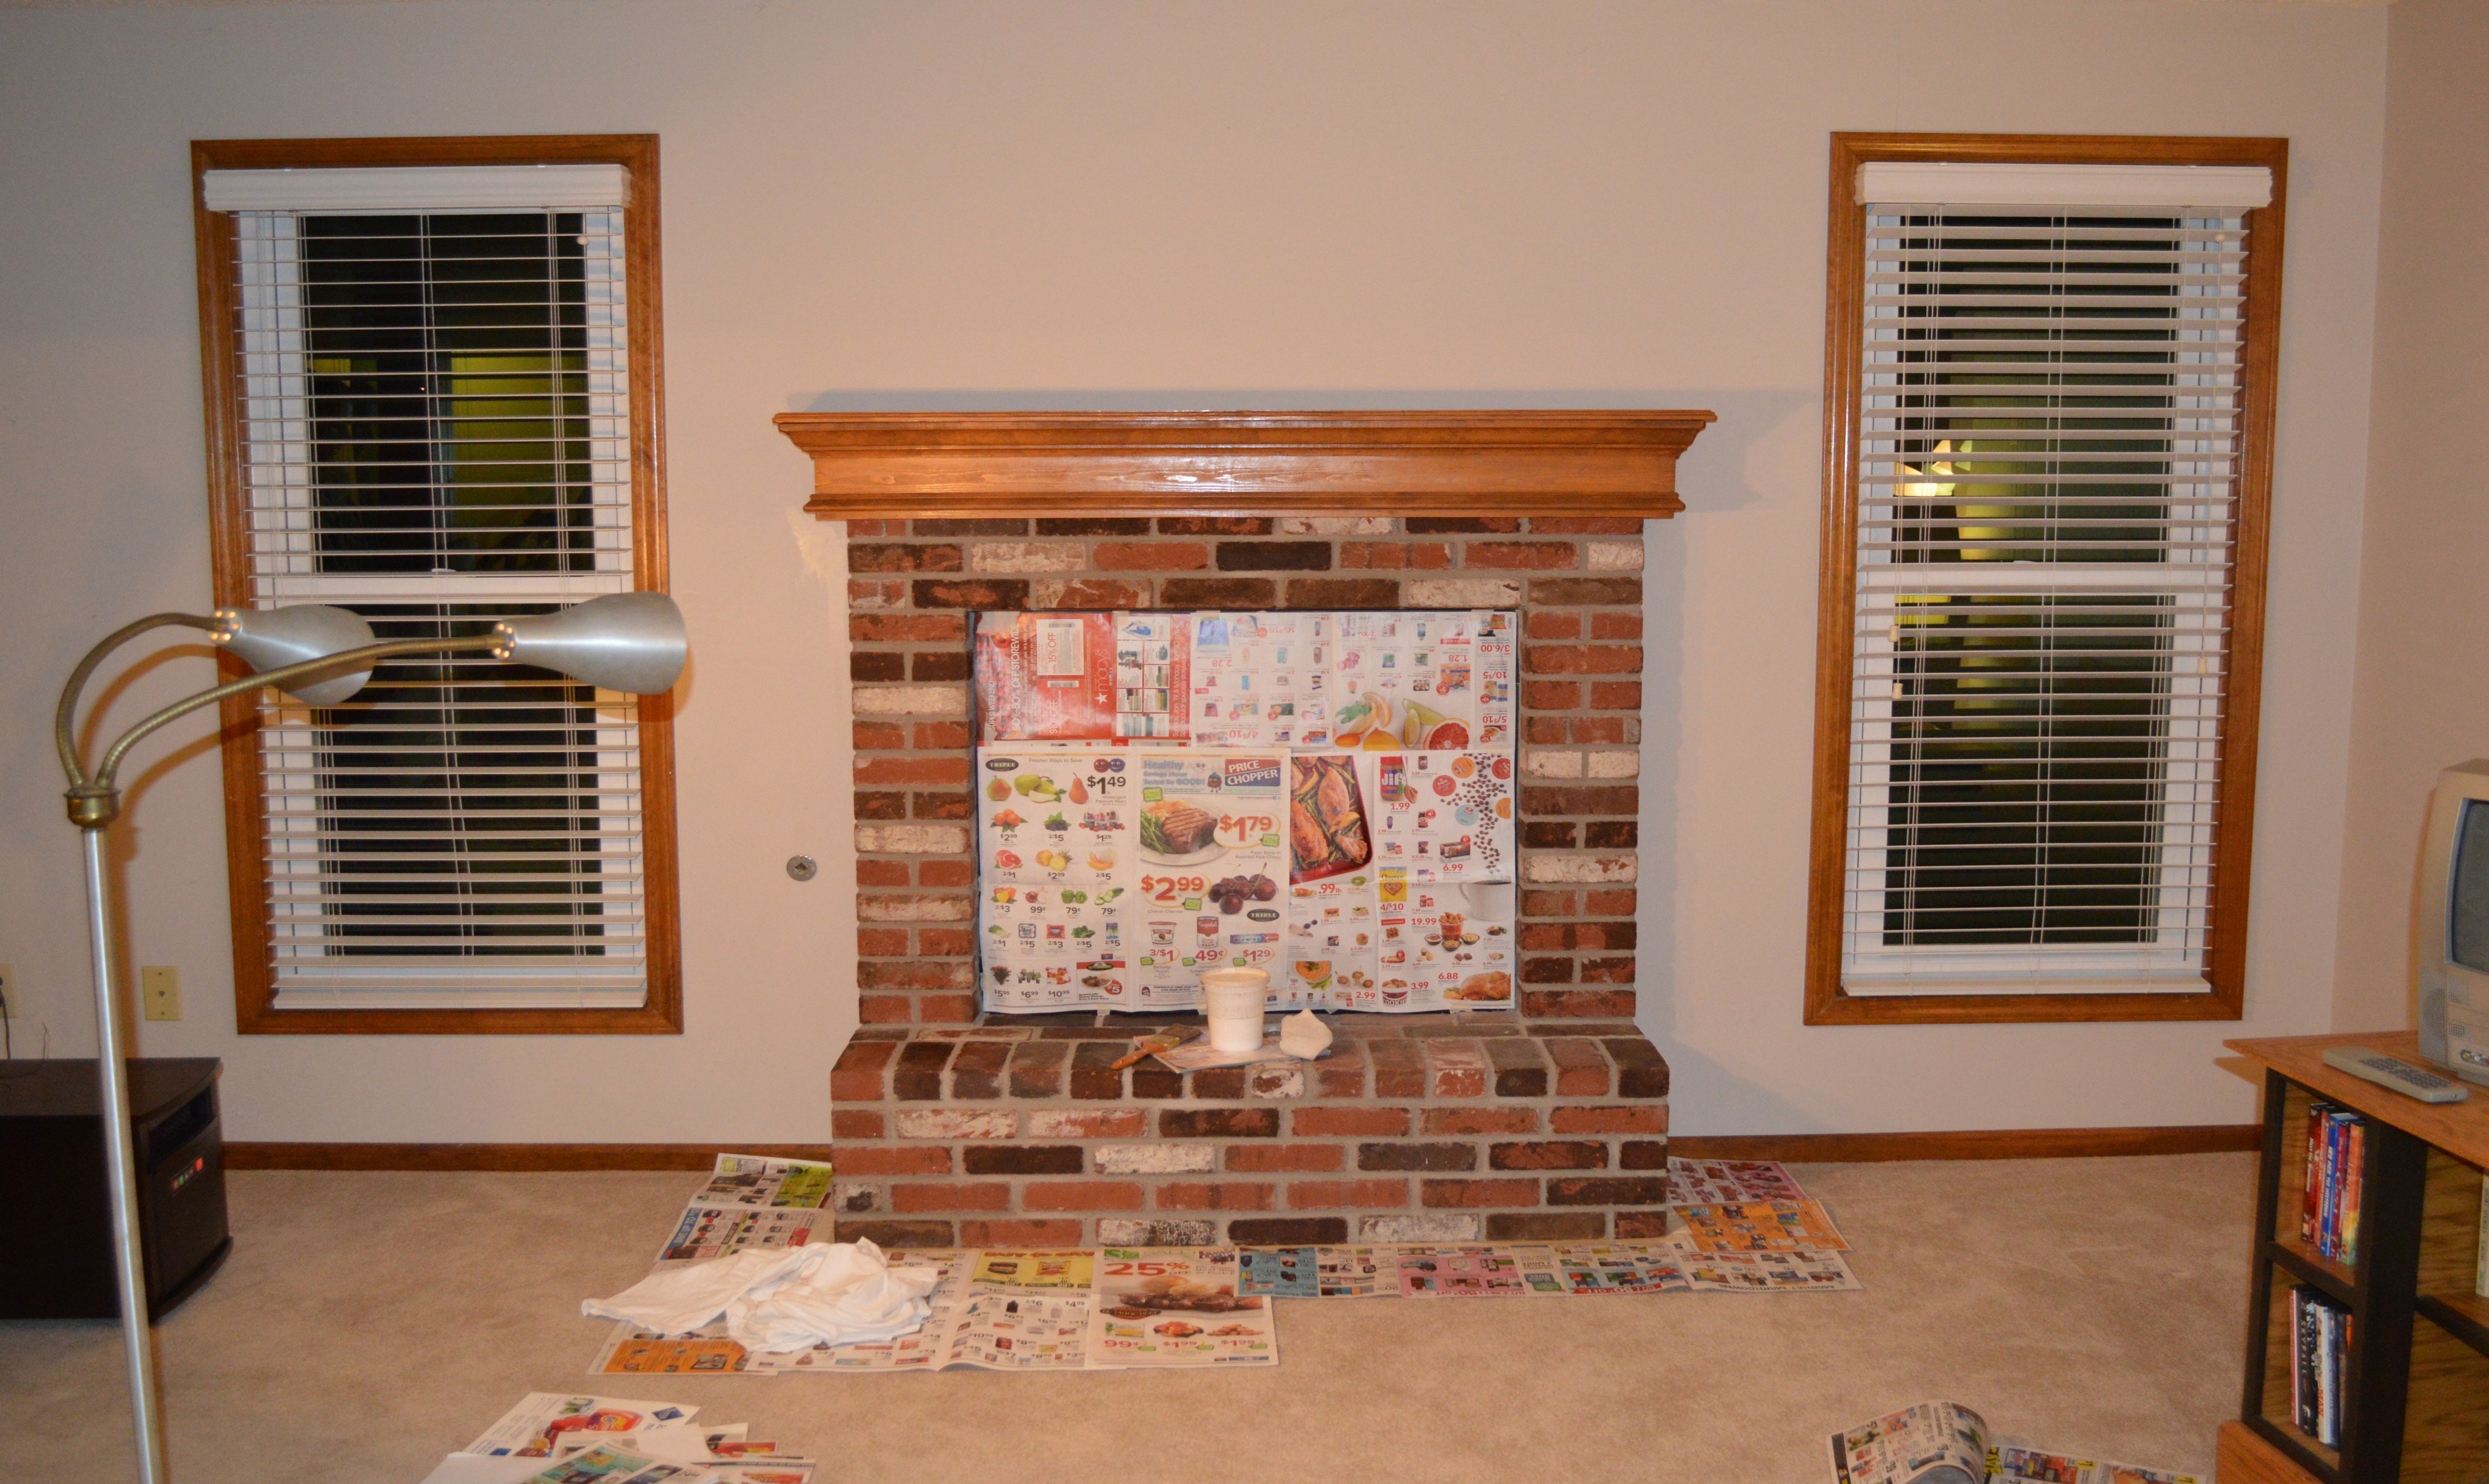 Whitewash Fireplace before and after Luxury White Washed Brick Fireplace Ideas for Brick Fireplace